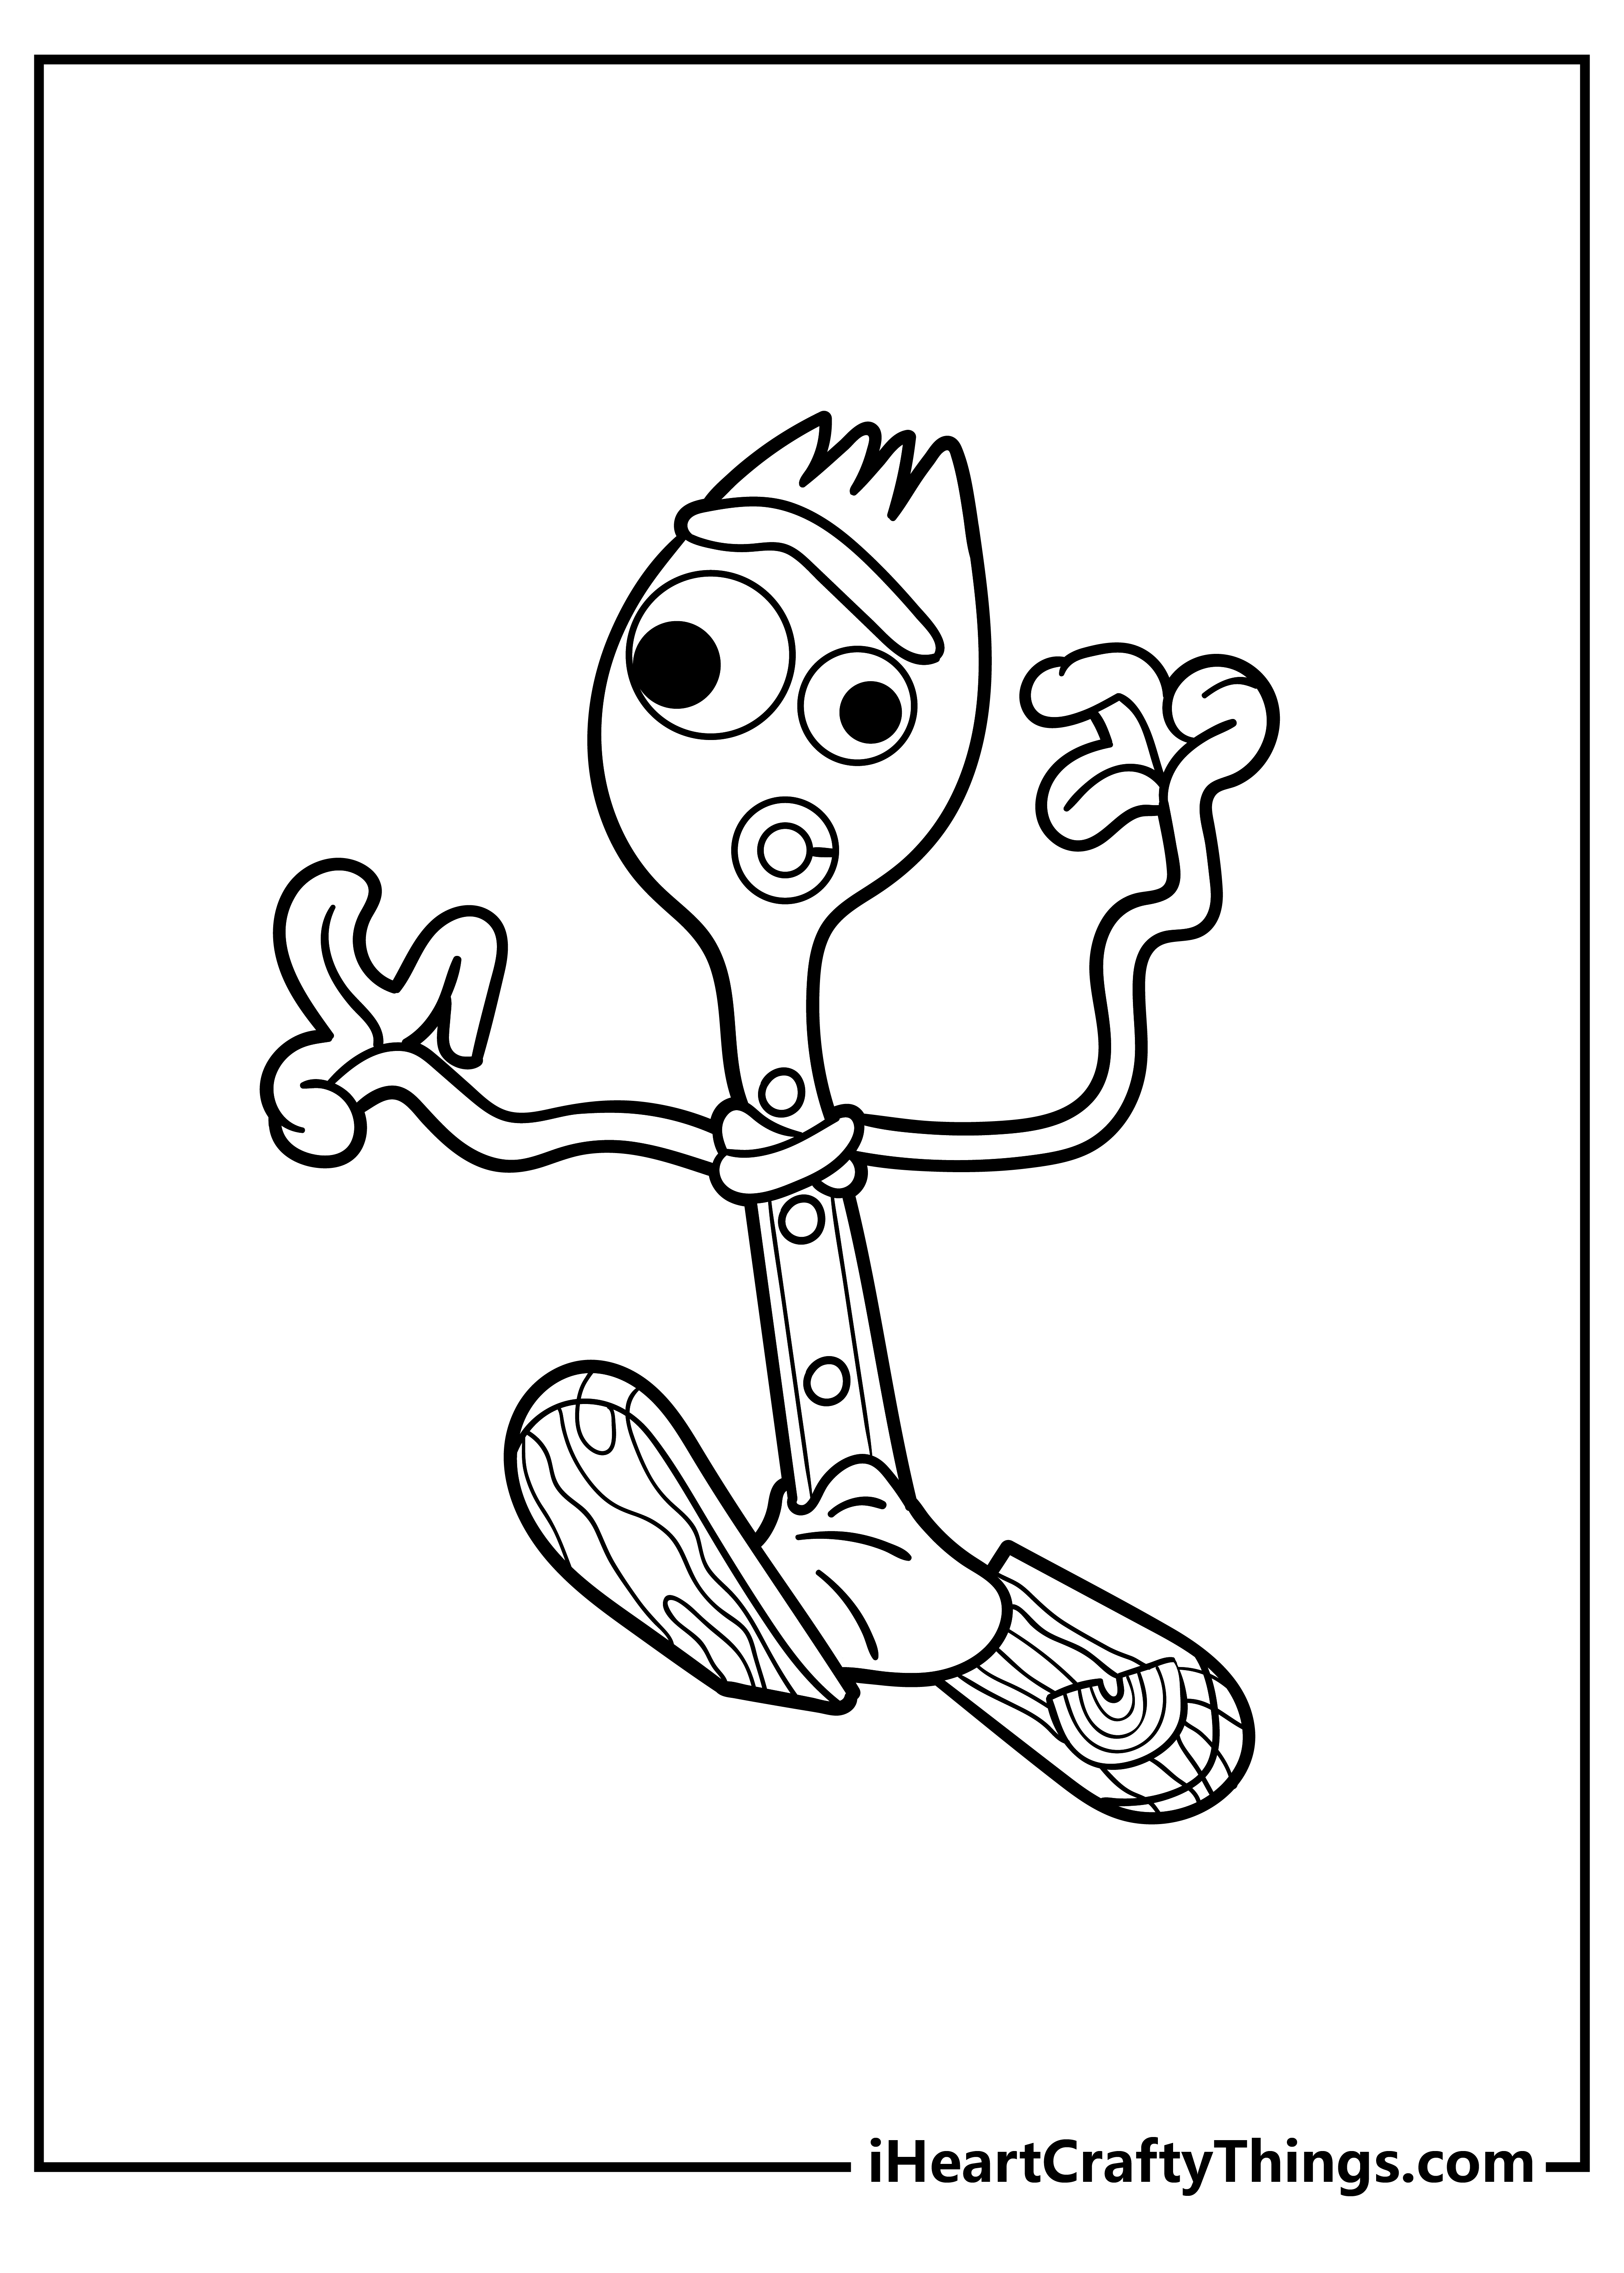 Toy story coloring pages free printables